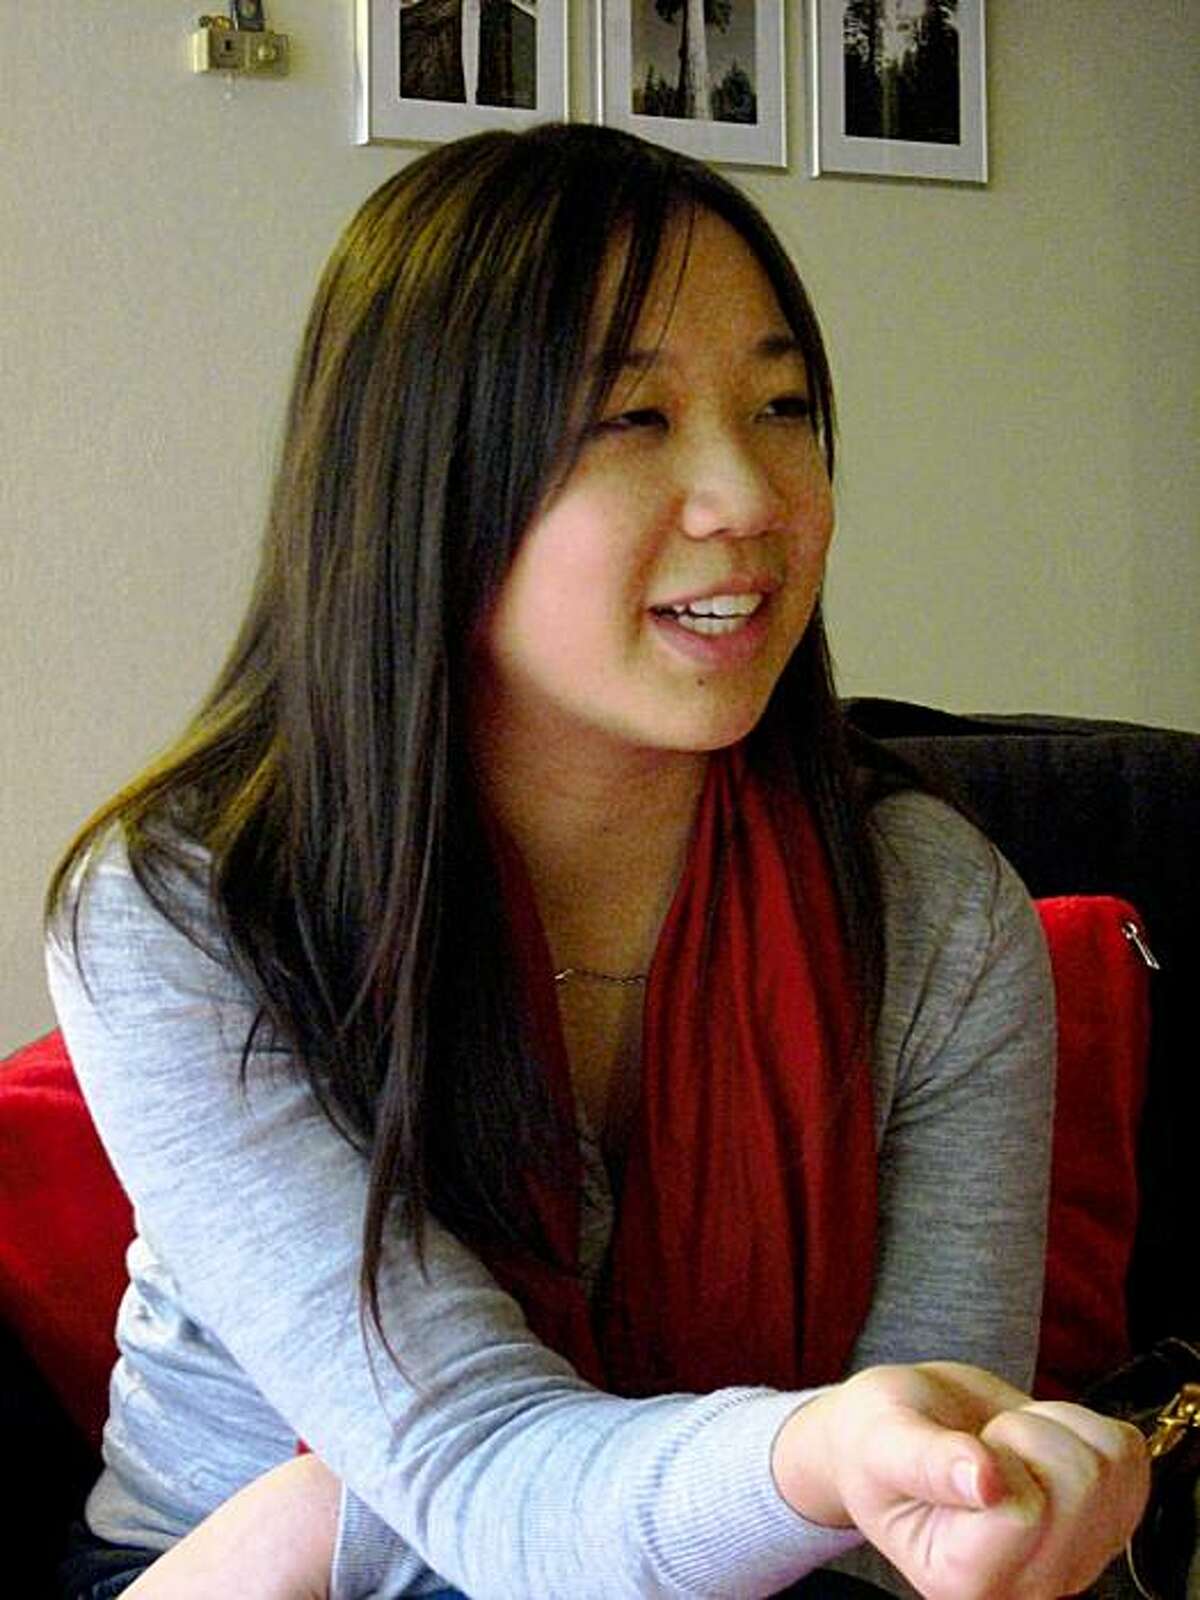 Teresa Wu started MyMomIsaFob.com and MyDadIsaFob.com with her childhood friend from Fremont, Serena Wu.